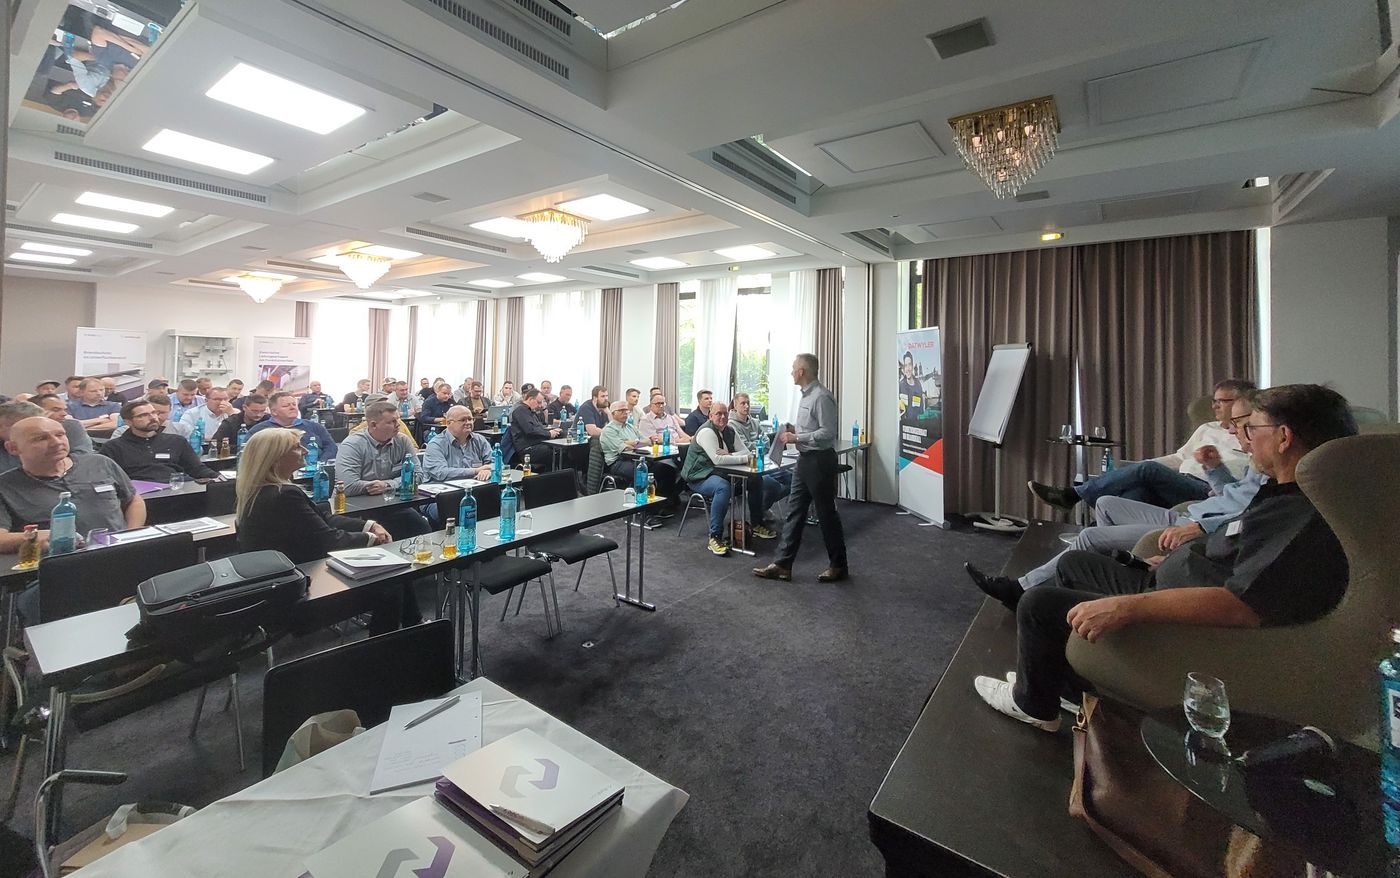  PohlCon hosted the second Fire Protection Day in Ratingen